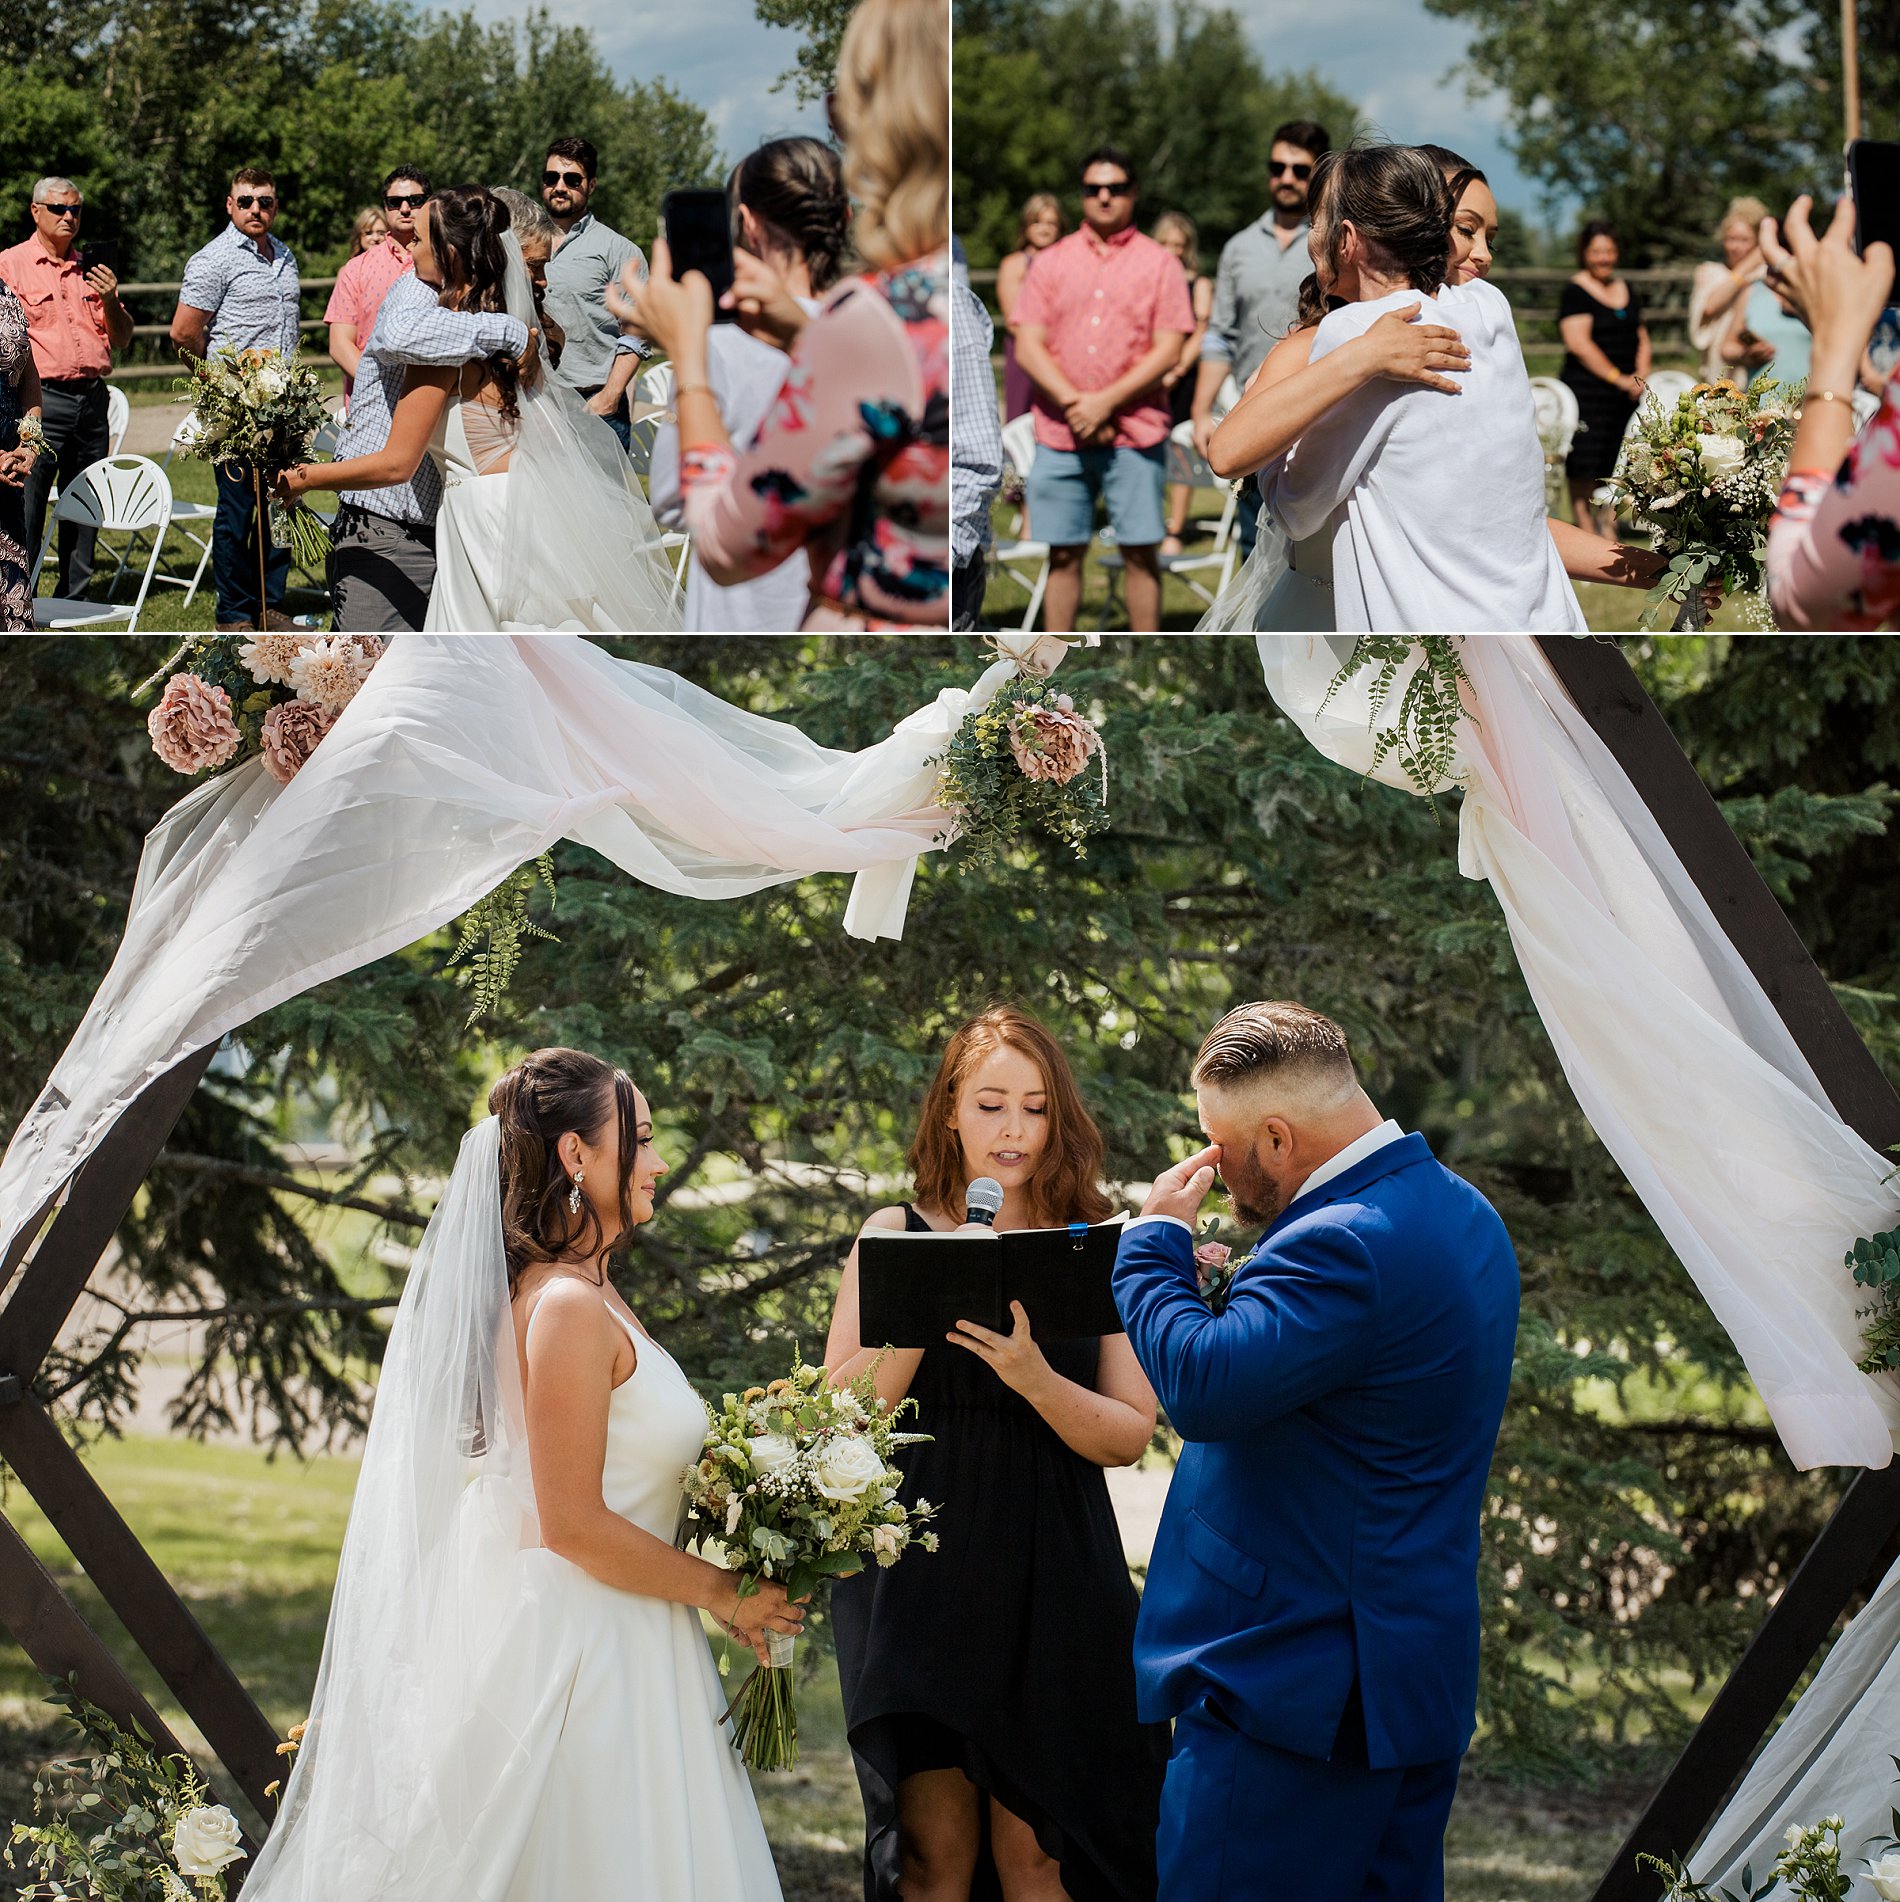 The bride and groom share an emotional moment at their backyard wedding.